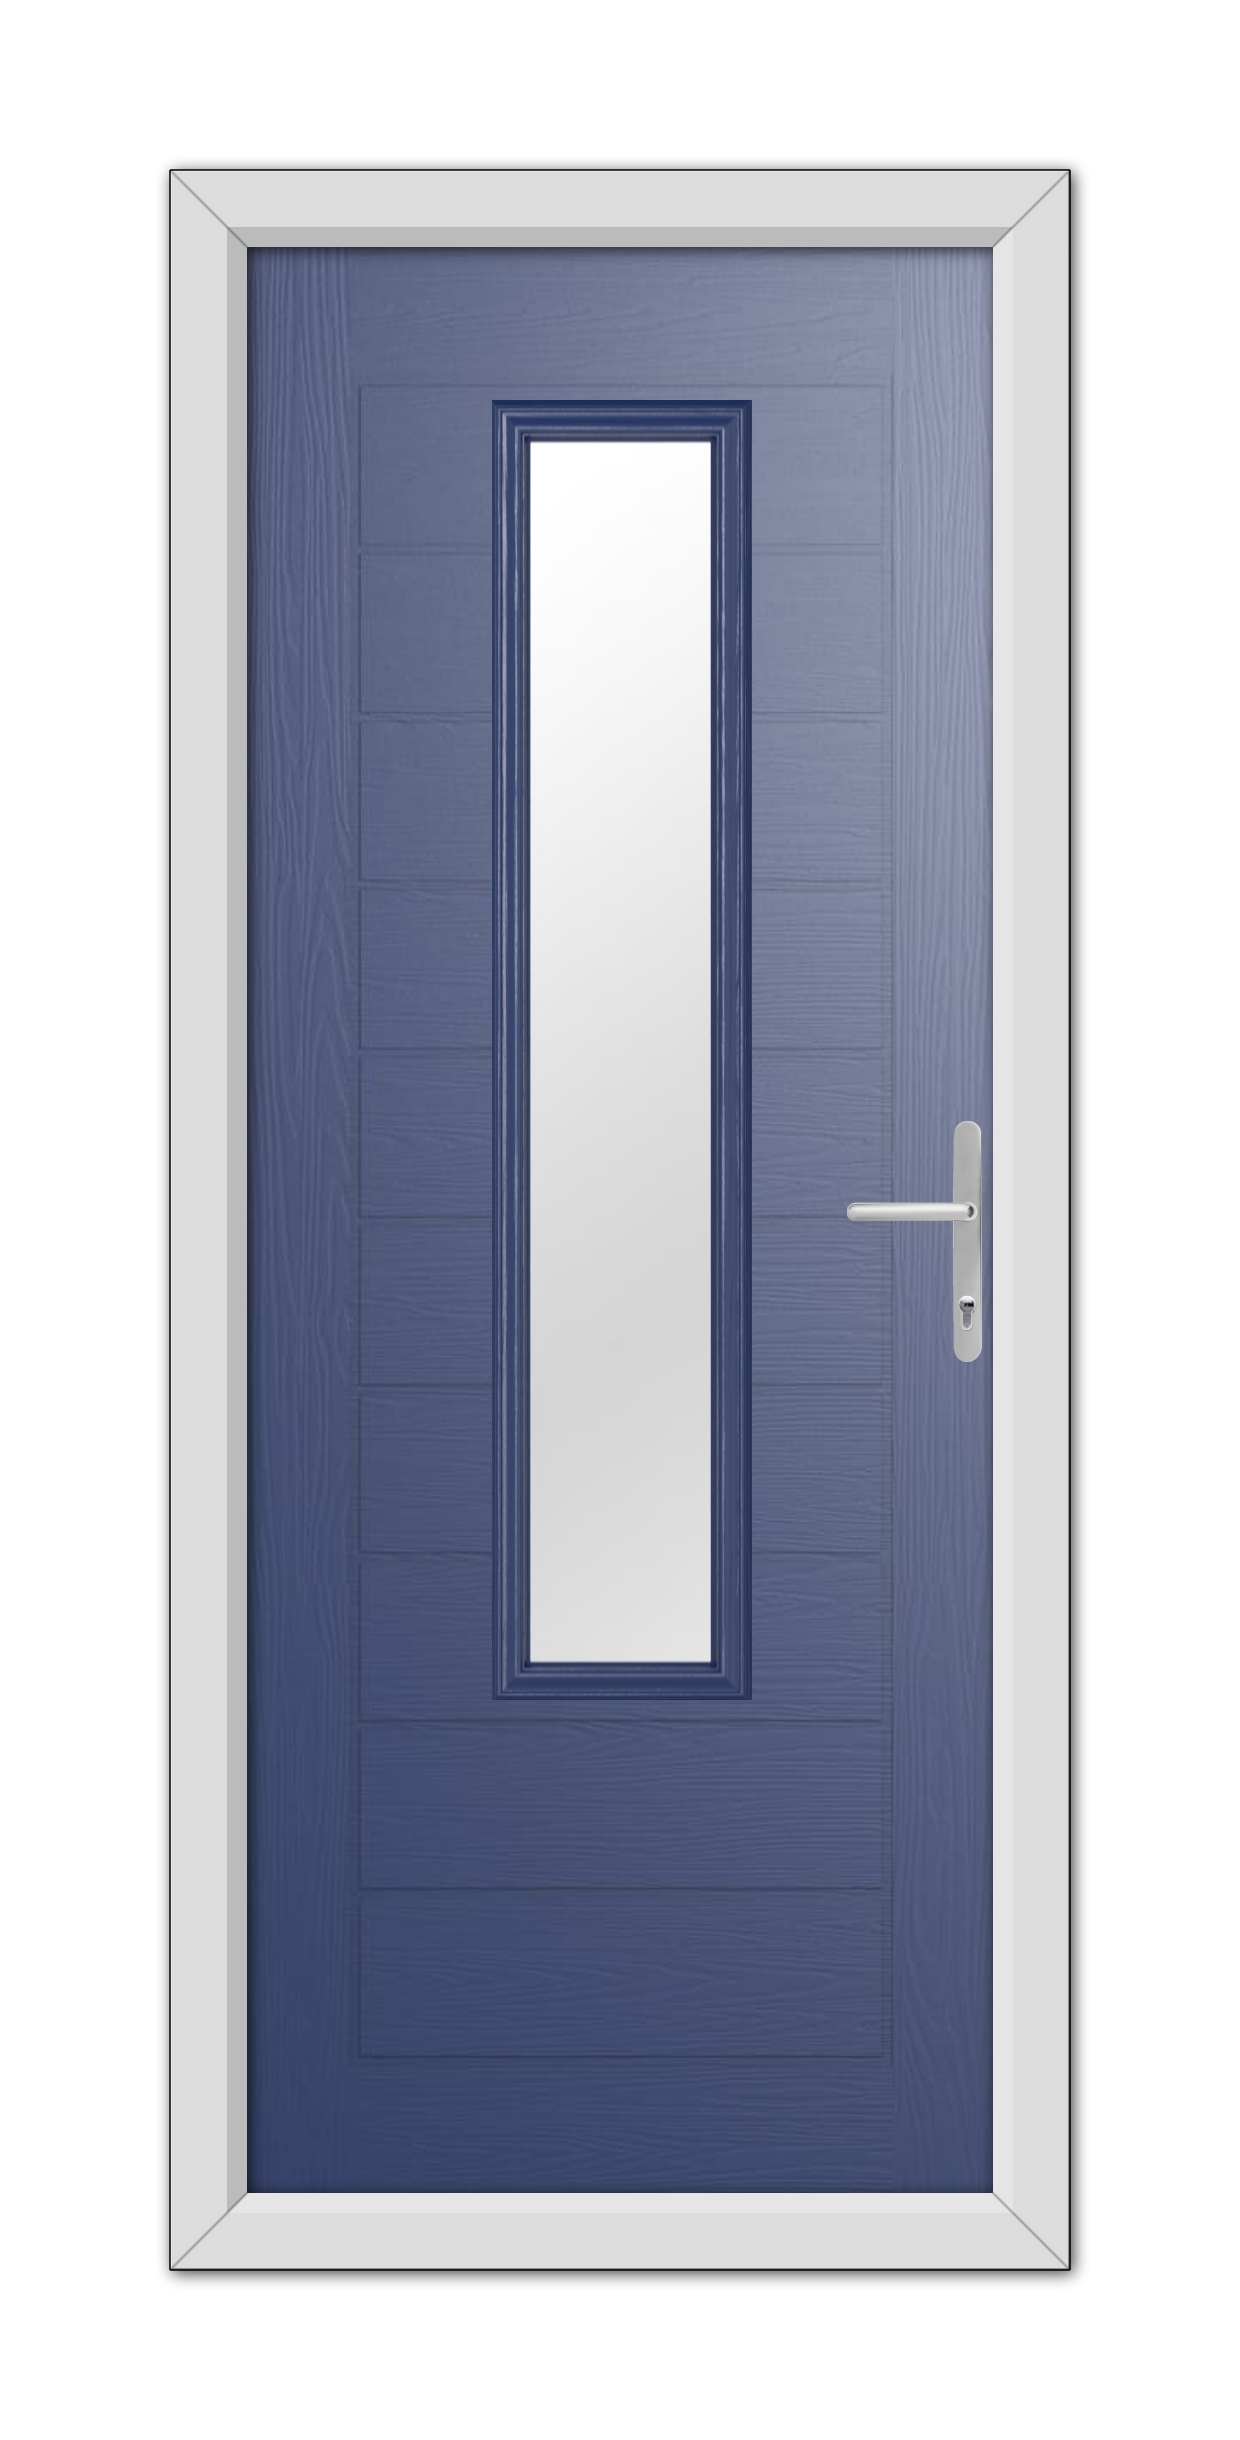 A Blue Bedford Composite Door 48mm Timber Core with a vertical handle and a long, narrow window, framed by a white door frame, isolated on a white background.